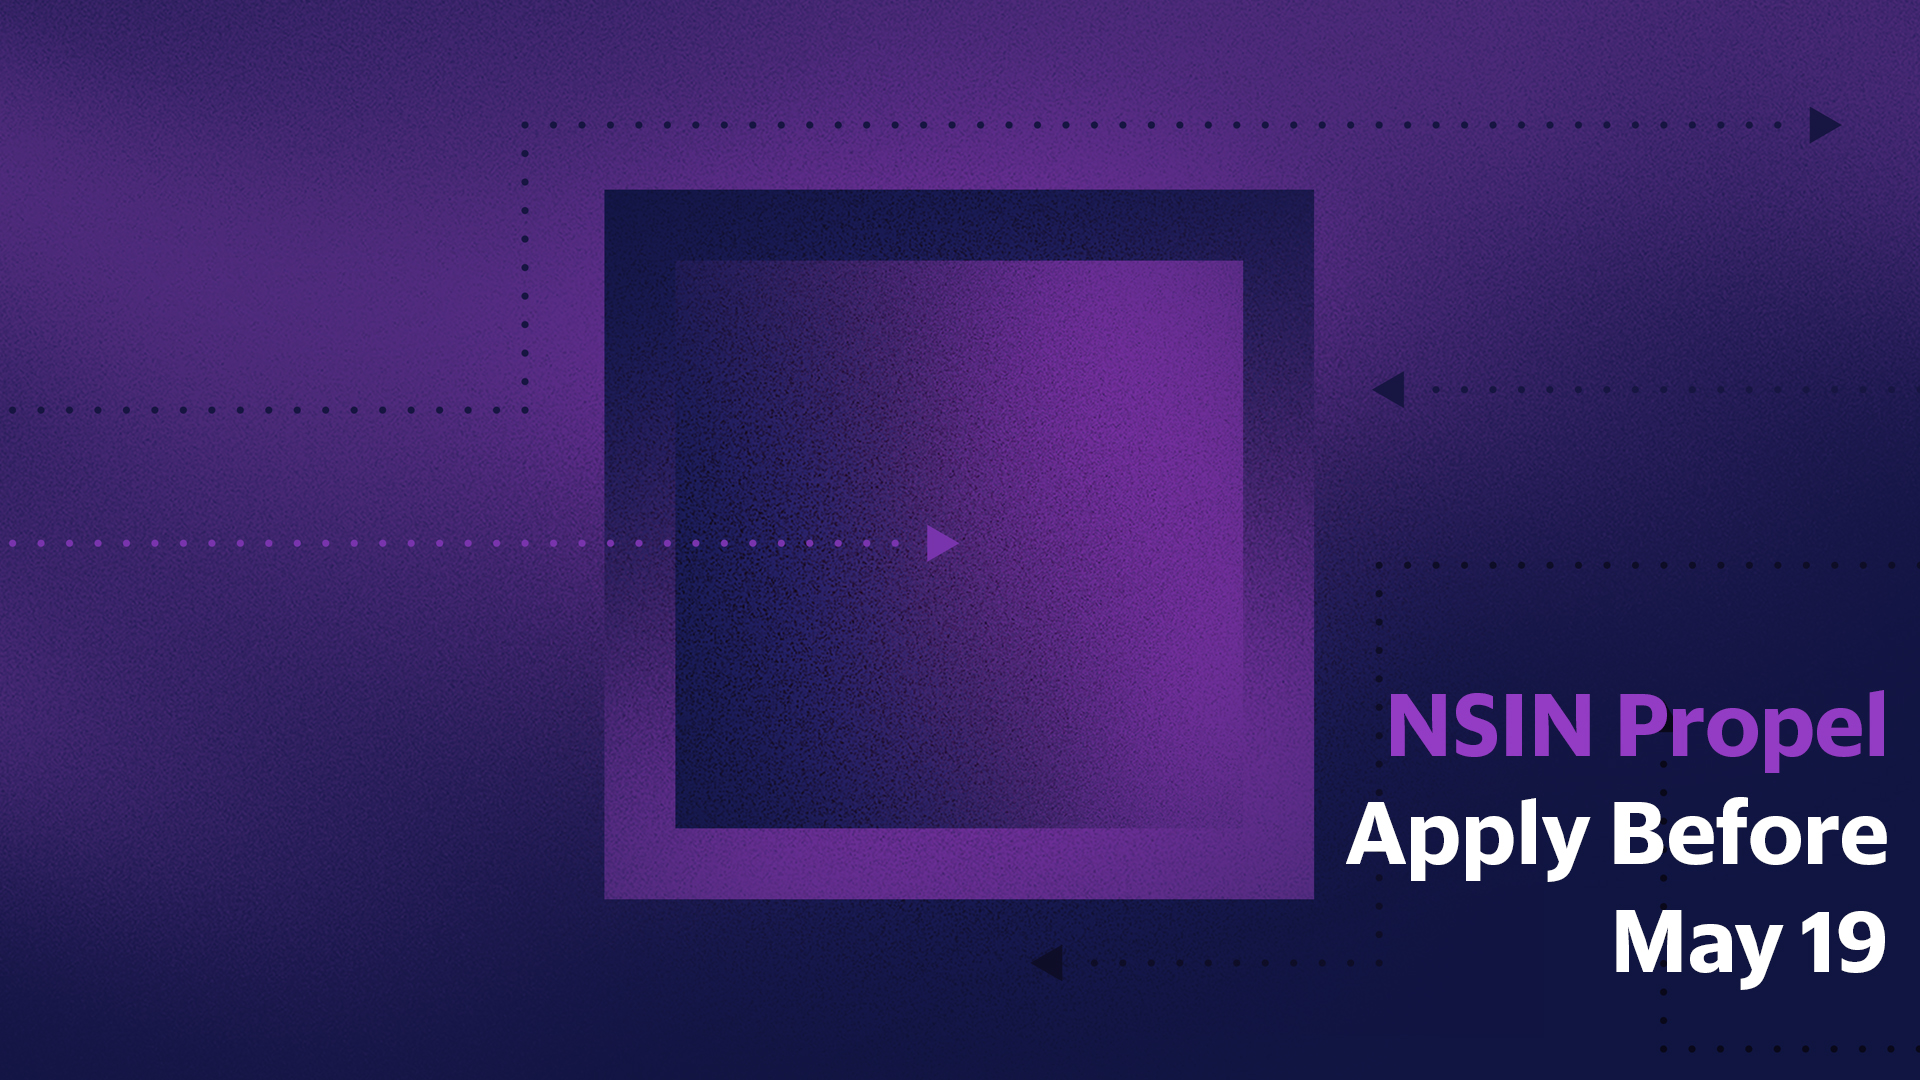 NSIN Propel Accelerator - Apply by May 19, 2021